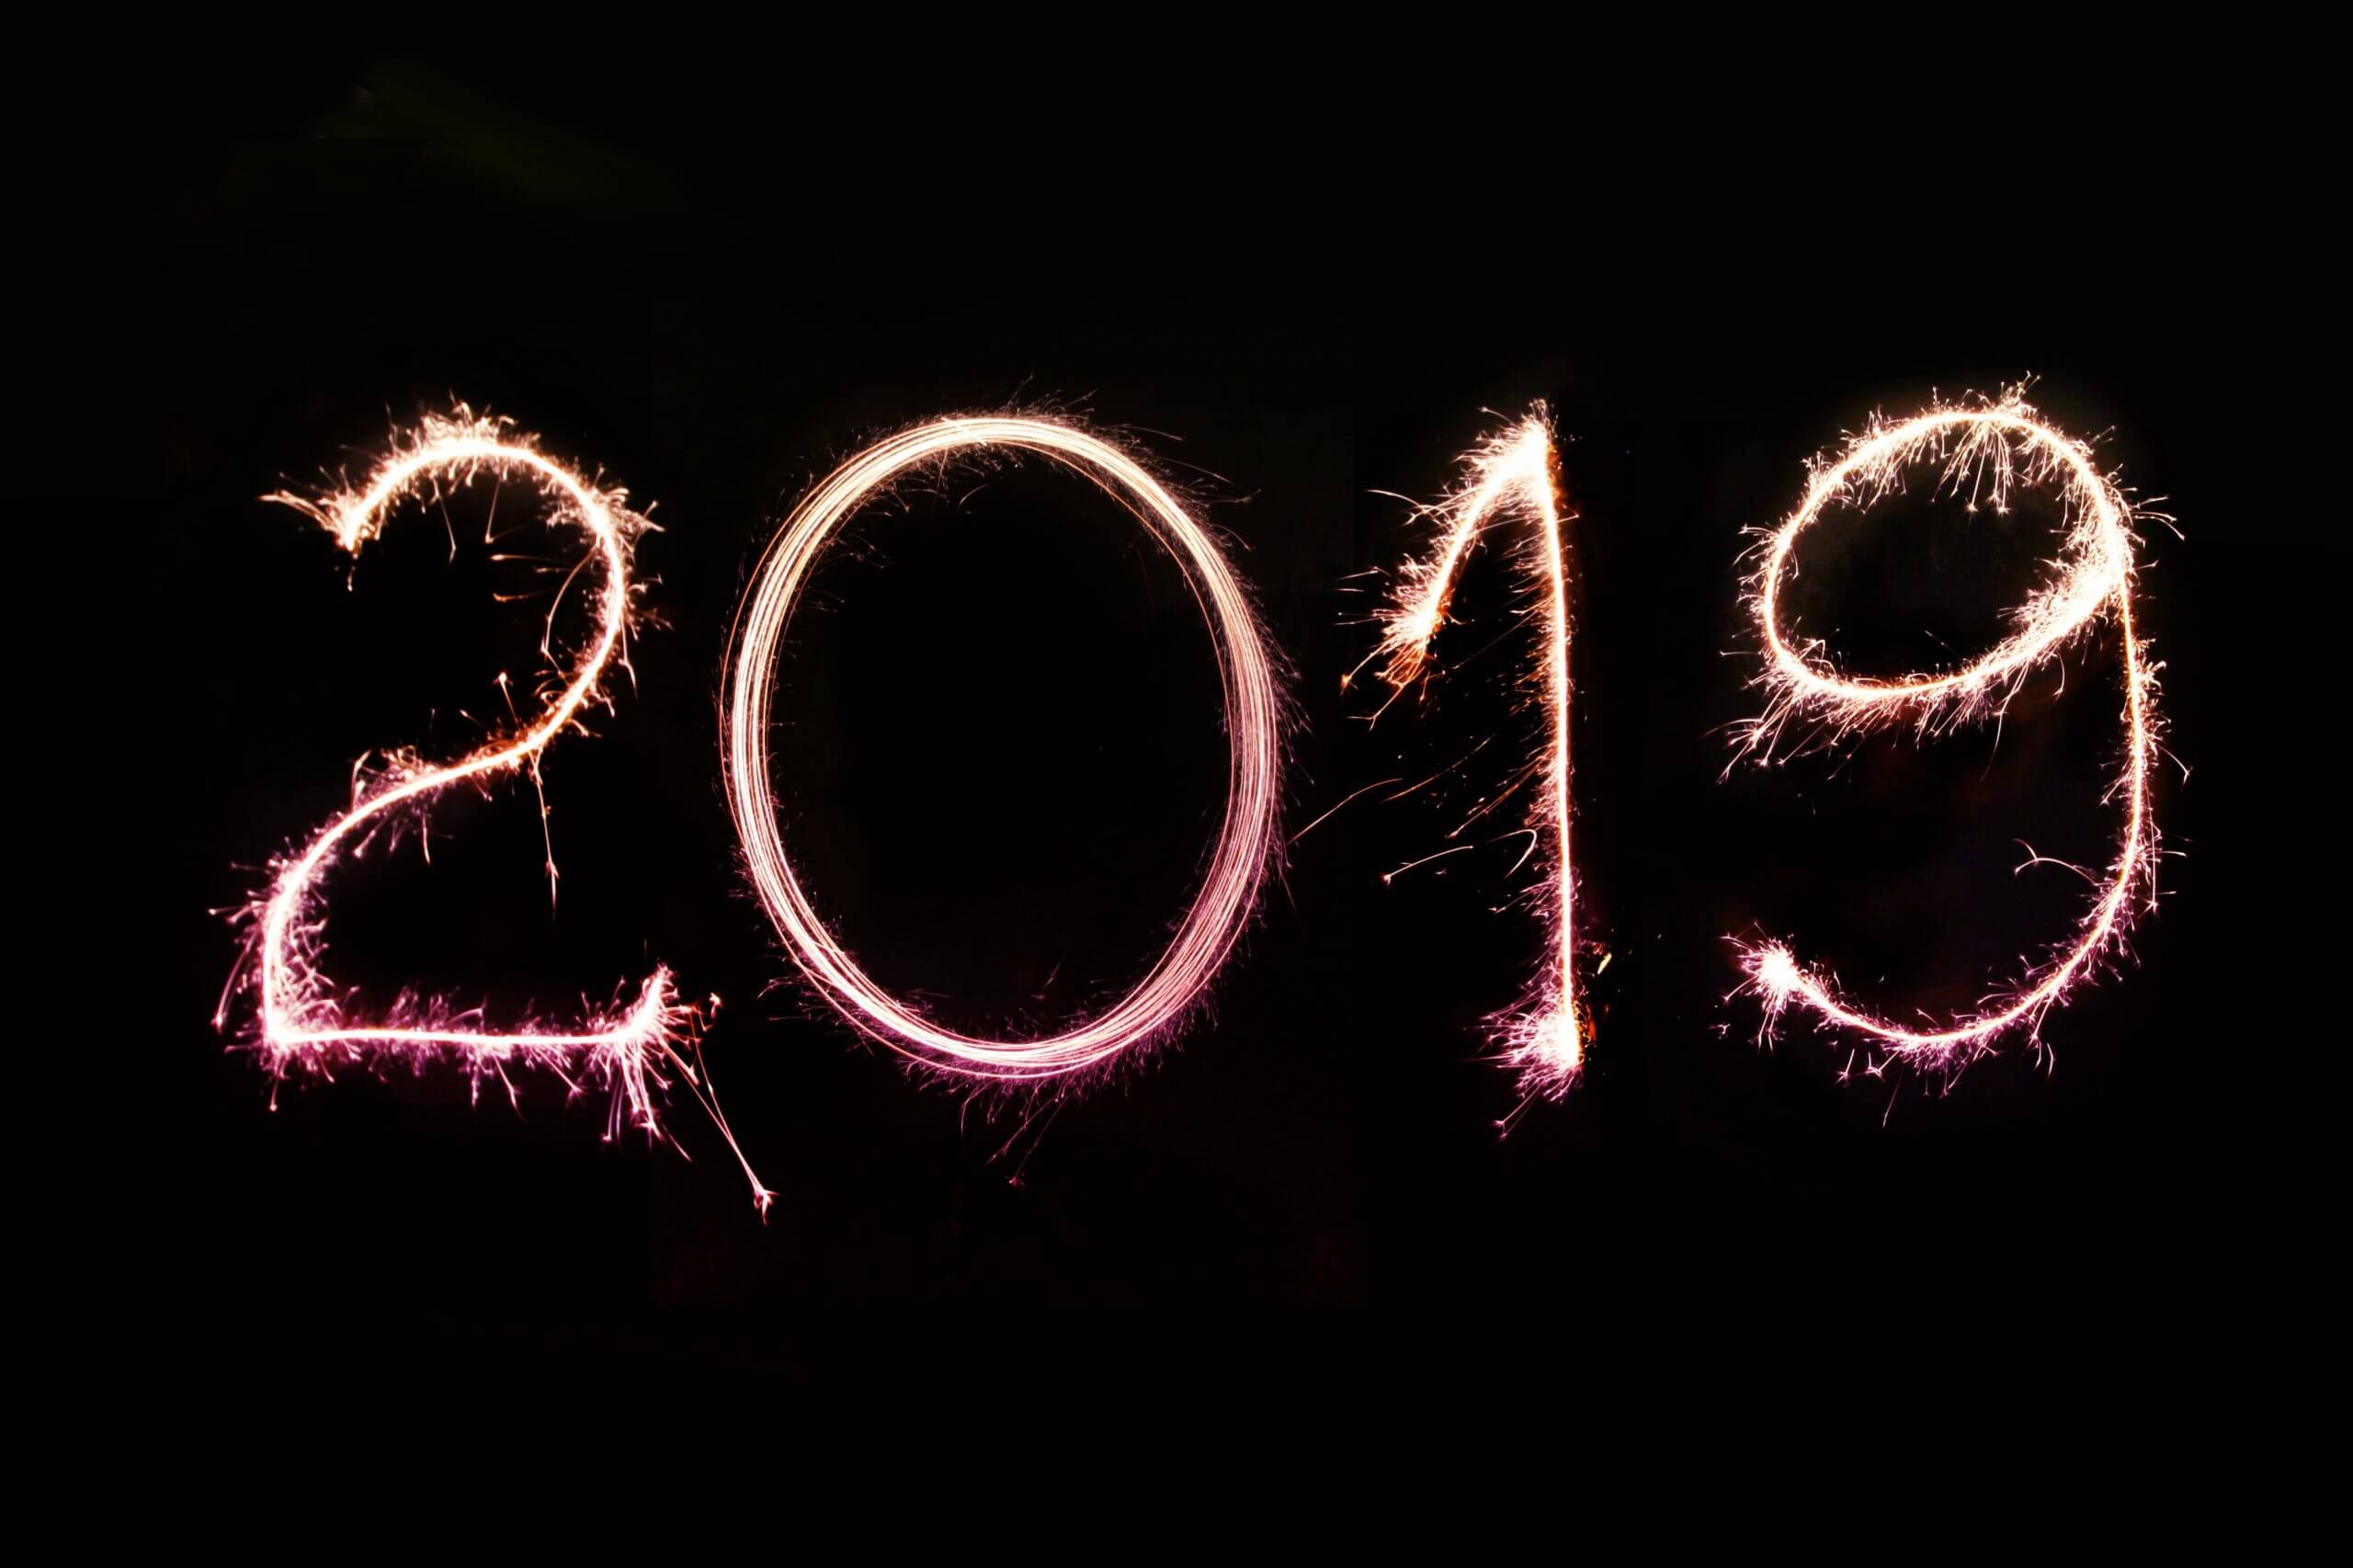 Black background with “2019” highlighted with a gold sparkler